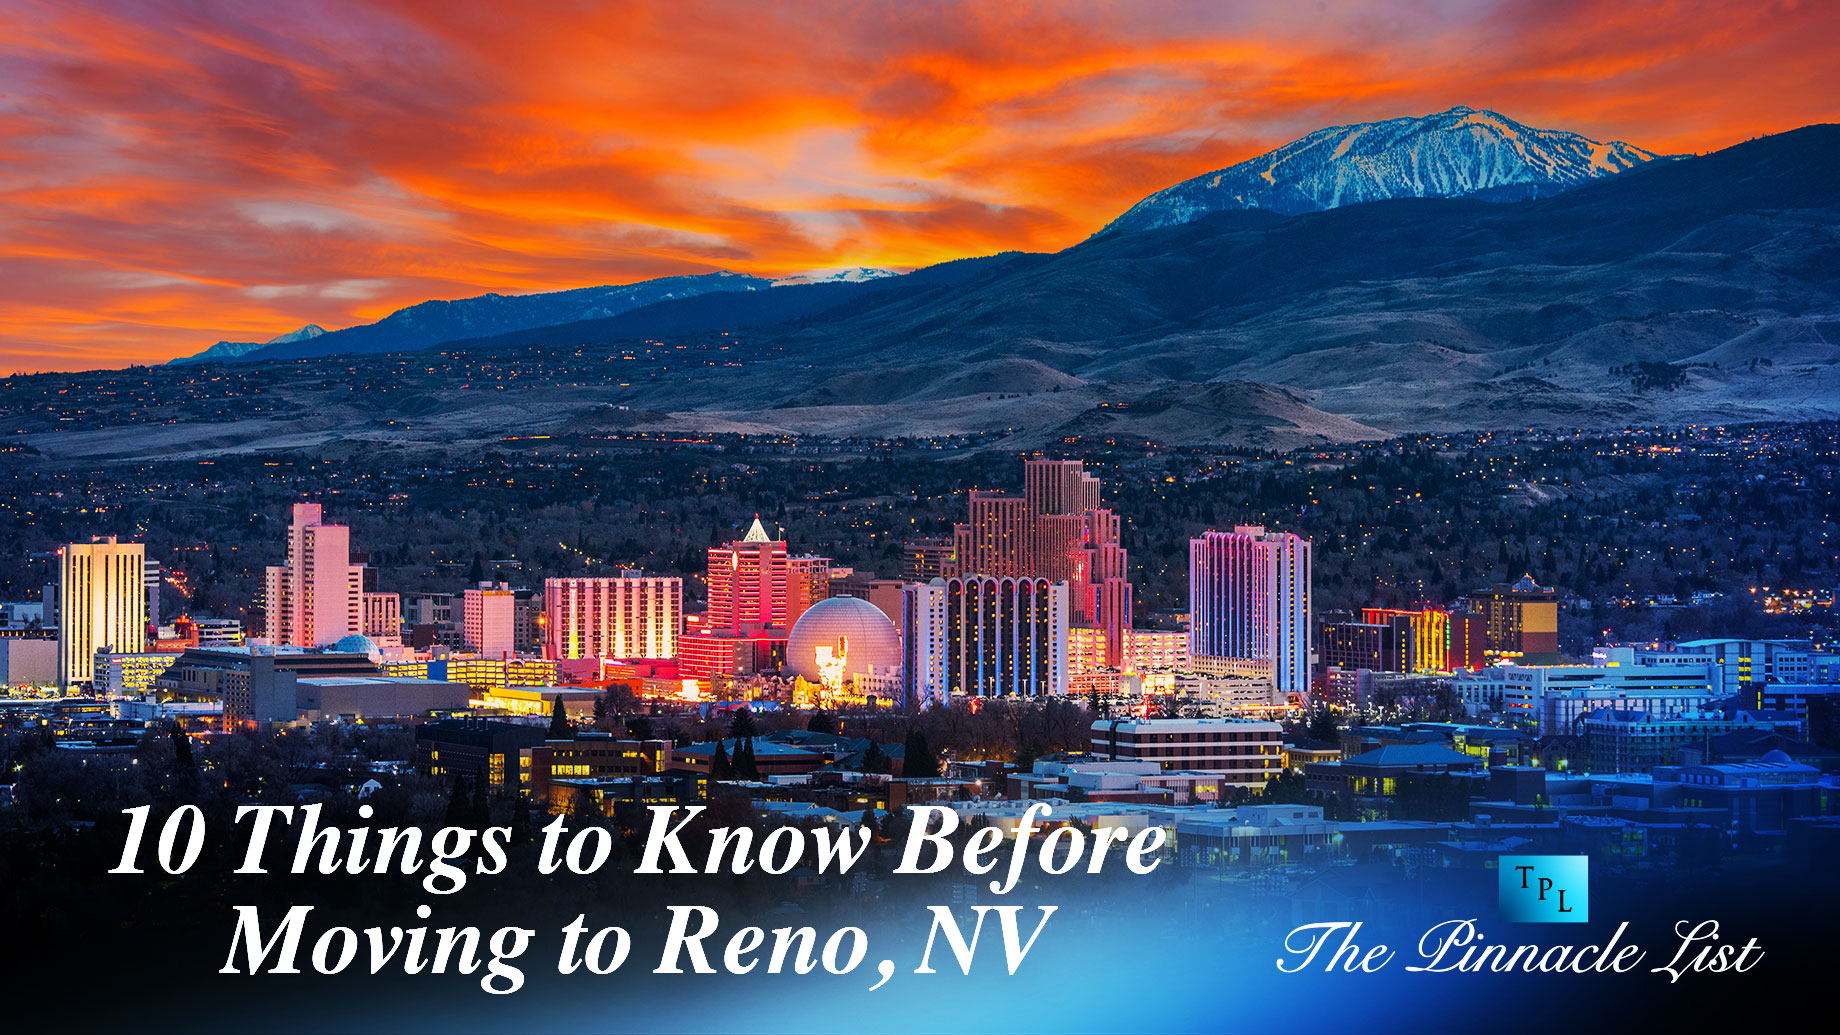 10 Things to Know Before Moving to Reno, NV